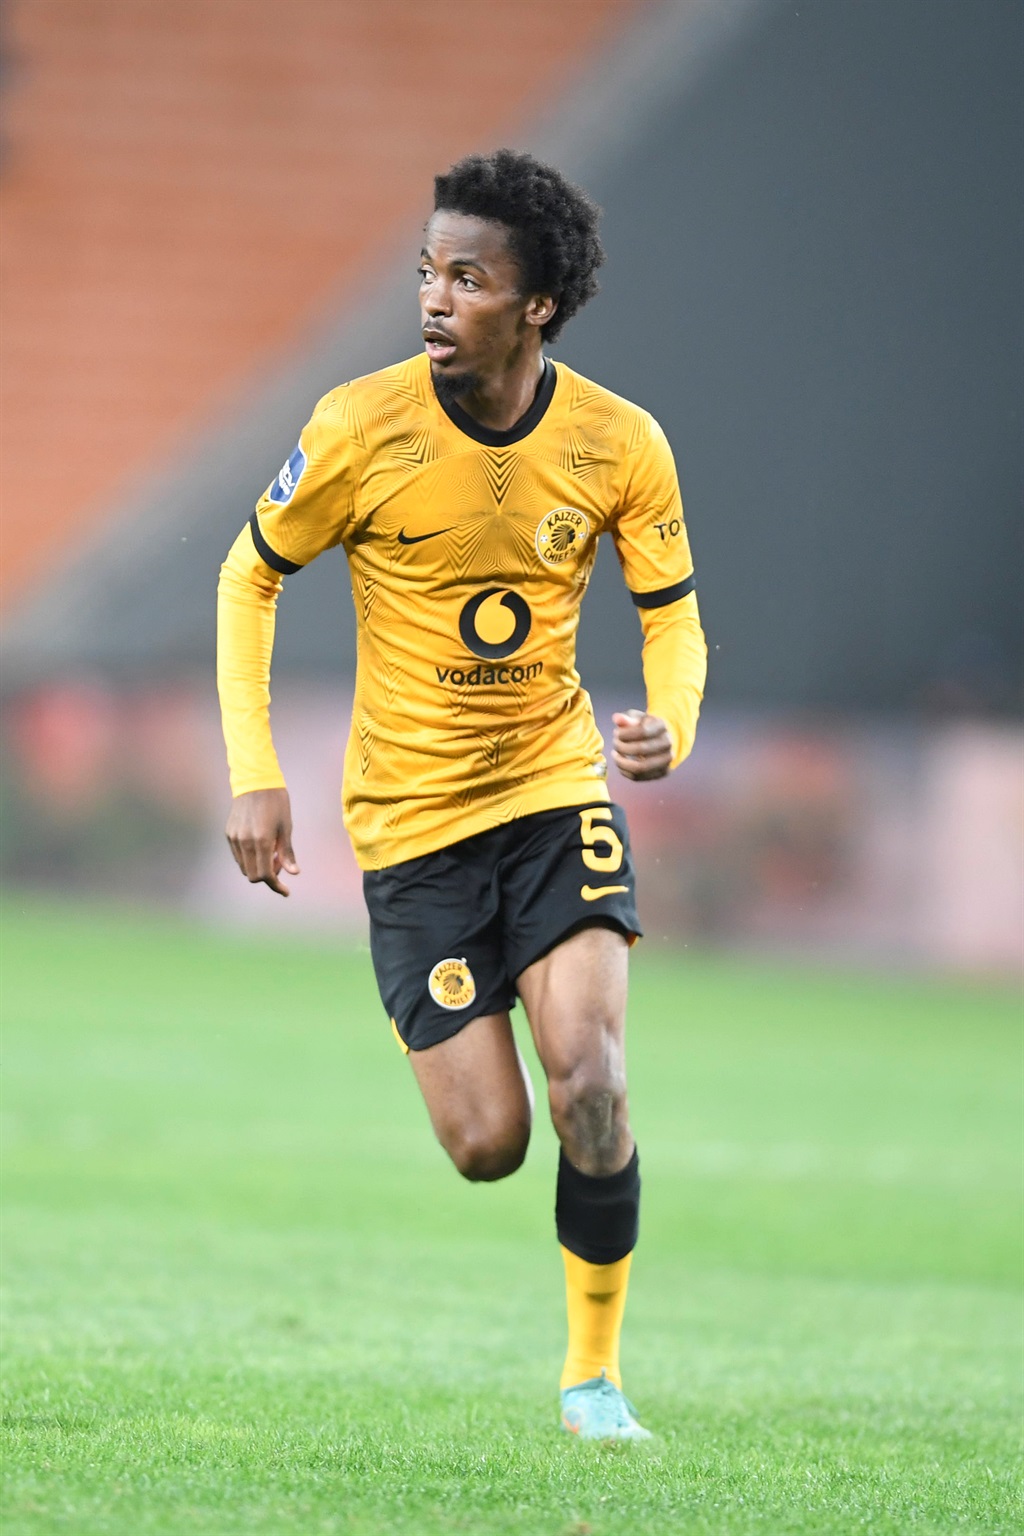 JOHANNESBURG, SOUTH AFRICA - JANUARY 07: Kamohelo Mahlatsi of Kaizer Chiefs during the DStv Premiership match between Kaizer Chiefs and Sekhukhune United at FNB Stadium on January 07, 2023 in Johannesburg, South Africa. (Photo by Lefty Shivambu/Gallo Images)